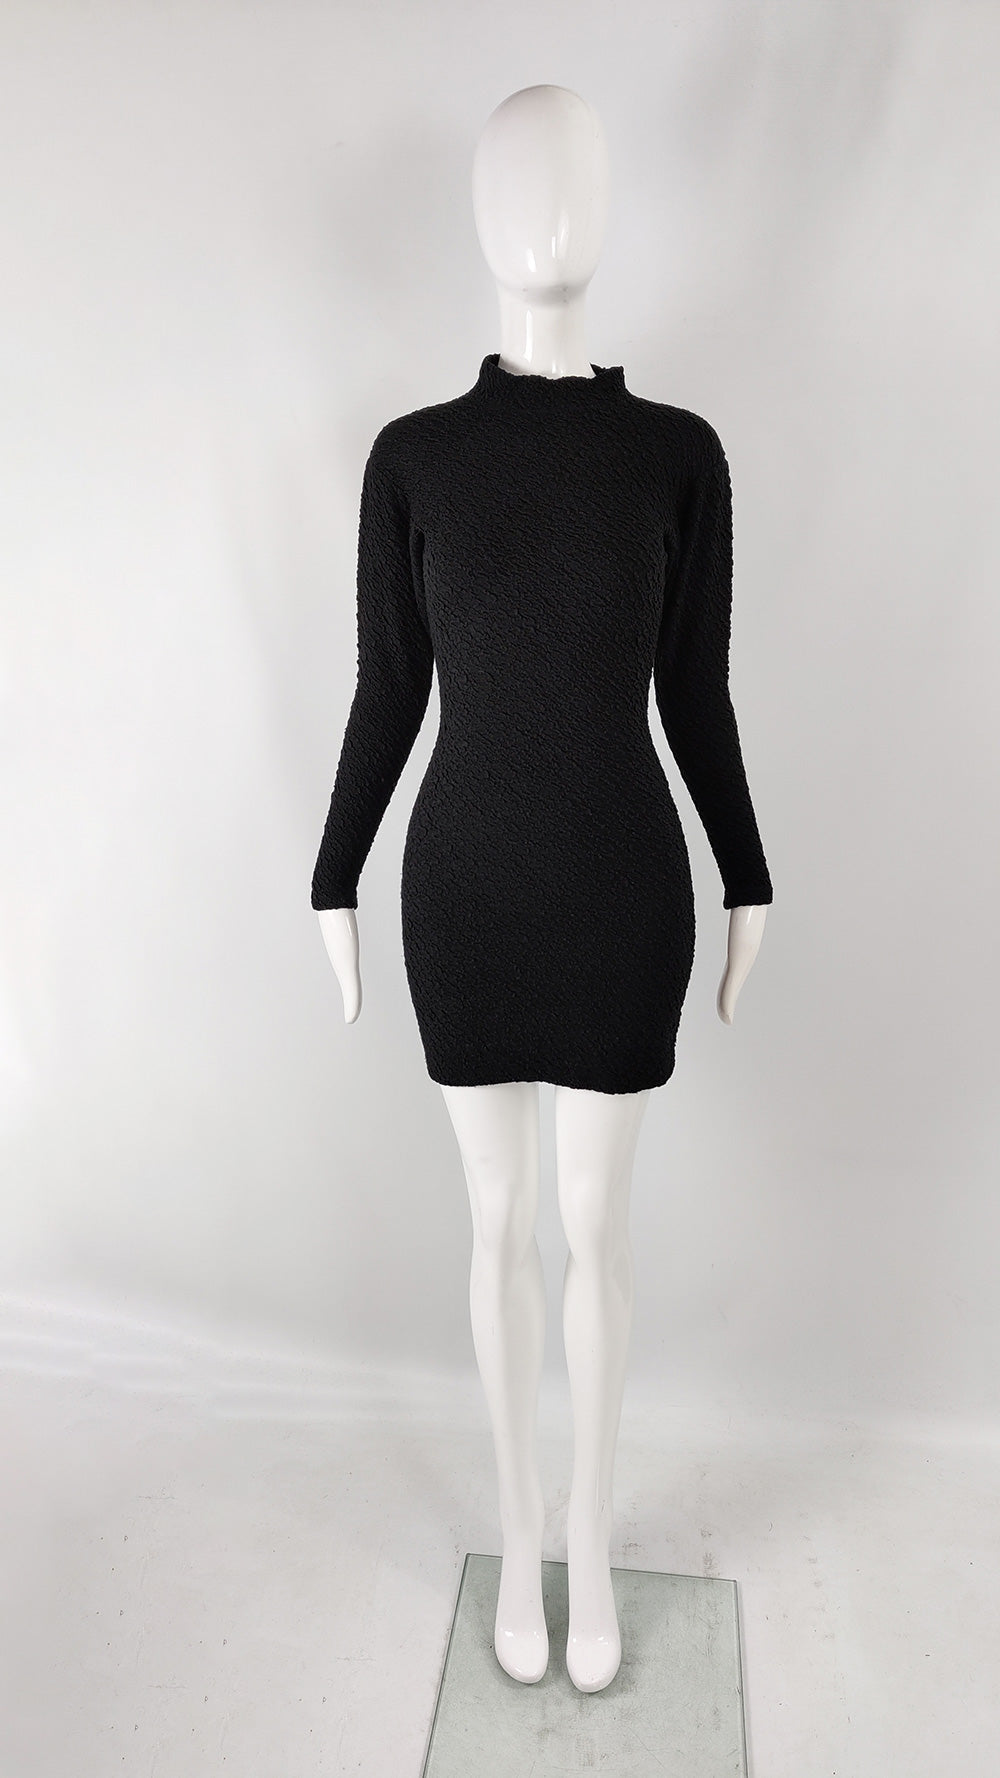 Fiorucci Vintage Crinkled Long Sleeve Cut Out Bodycon Dress, 1980s